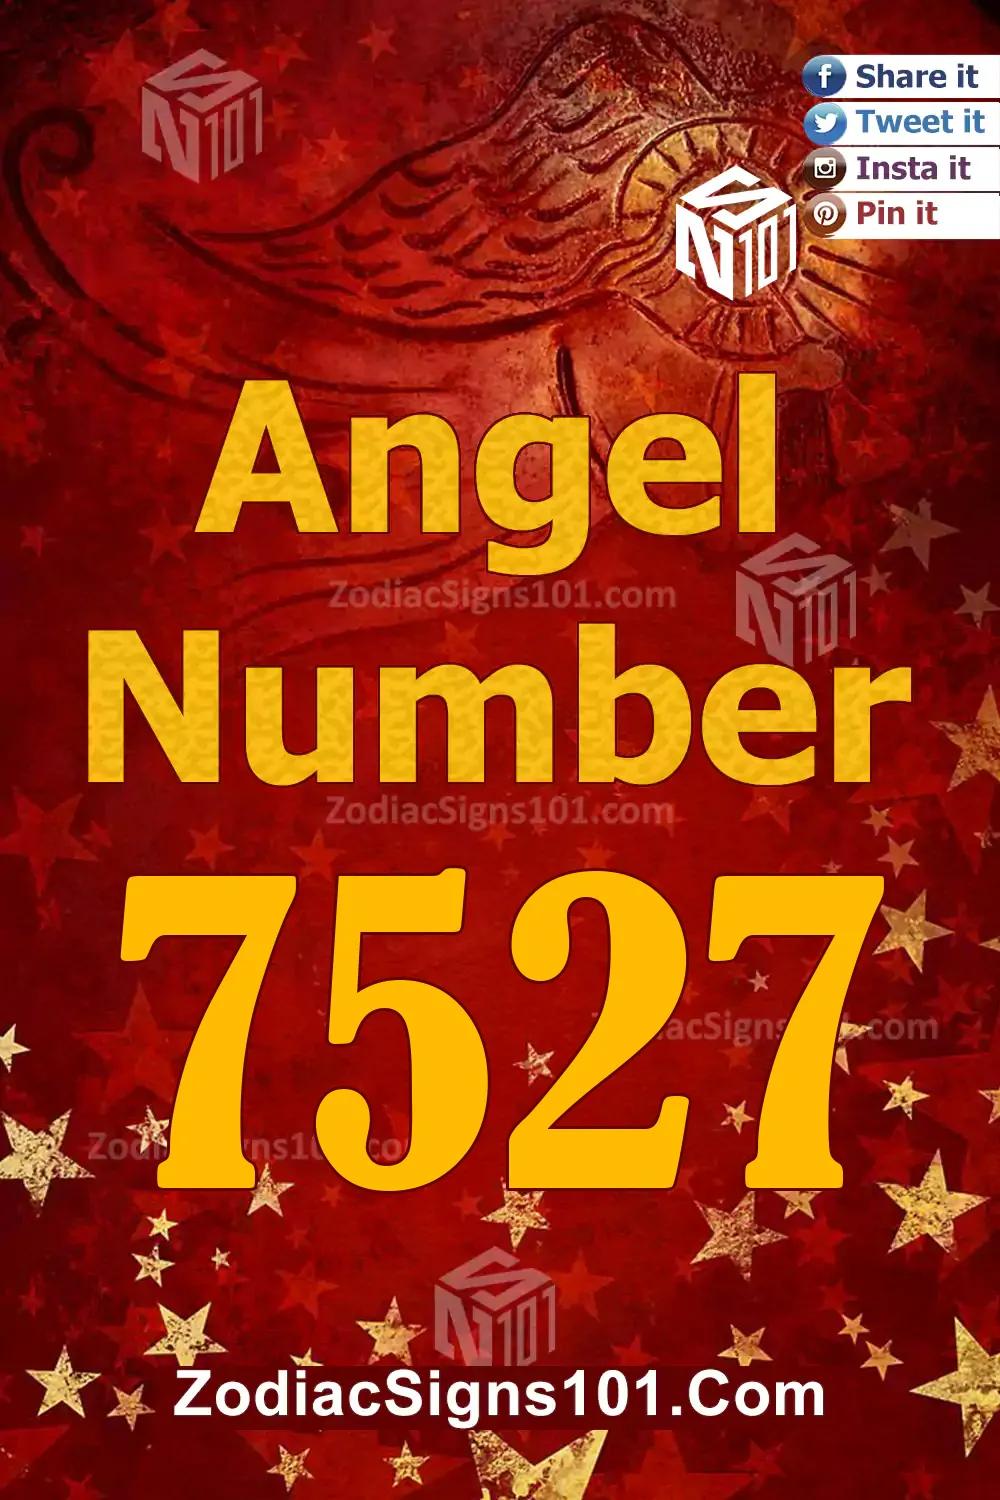 7527 Angel Number Meaning